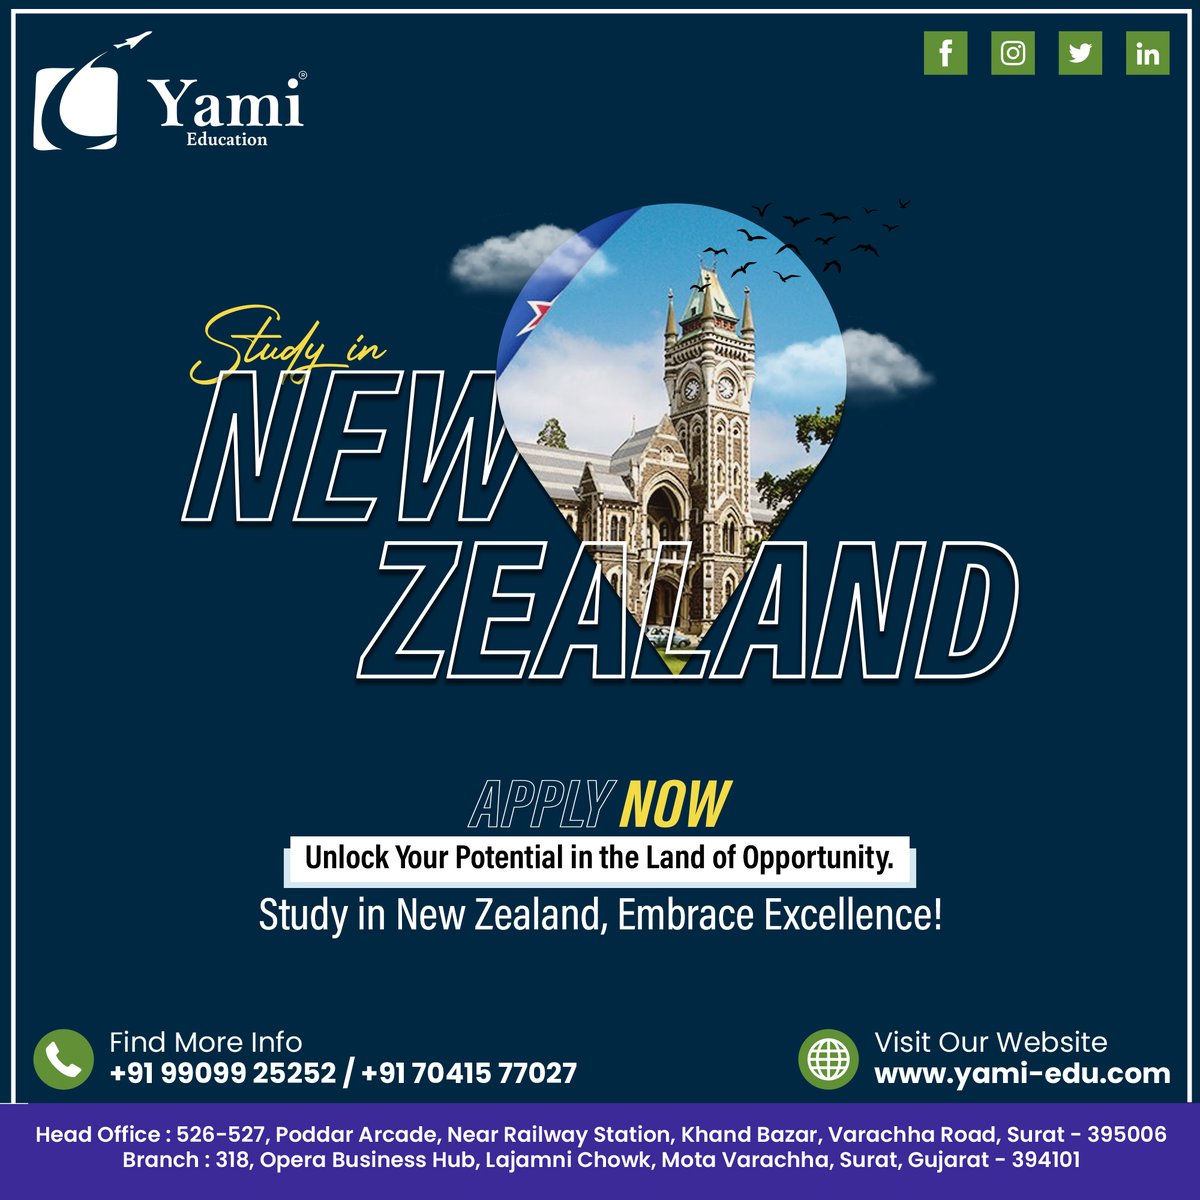 📢 Study In New Zealand
➡️ Unlock Your Potential In The Land Of Opportunity.
☎️ Call us +91 99099 25252 / +91 70415 77027
🌐 Visit Our Website yami-edu.com
#yami #yamiimmigration #studyinnewzealand #newzealandeducation #studyabroadnz